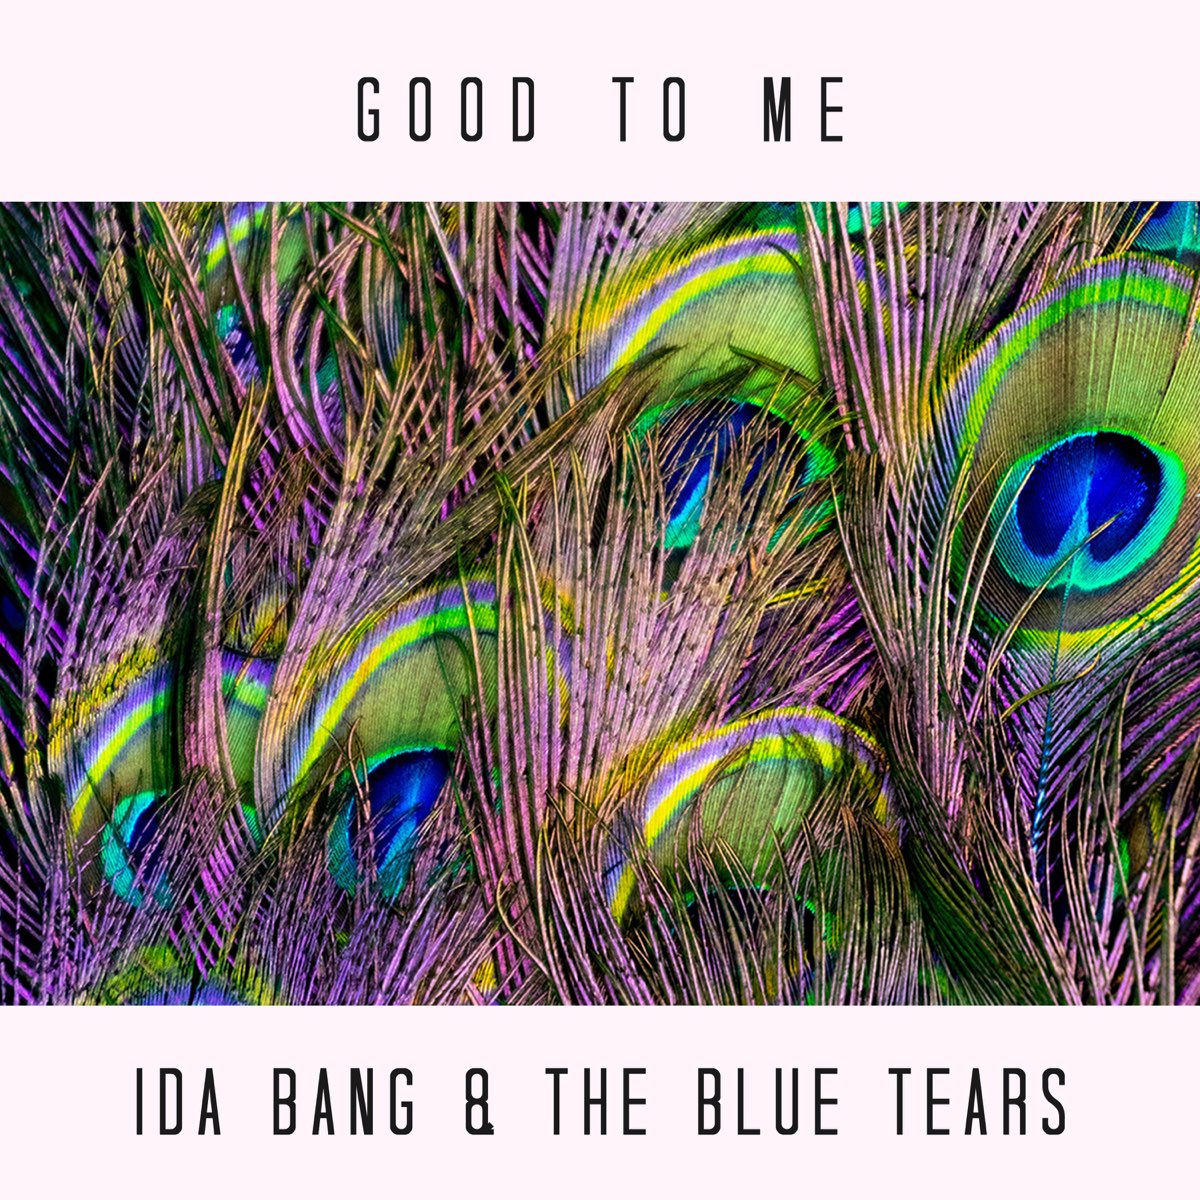 Bang blues. Blue tears. Blue tears - 1990 - Blue tears. Tears - the best of. Orange n Blue – tears all over you.